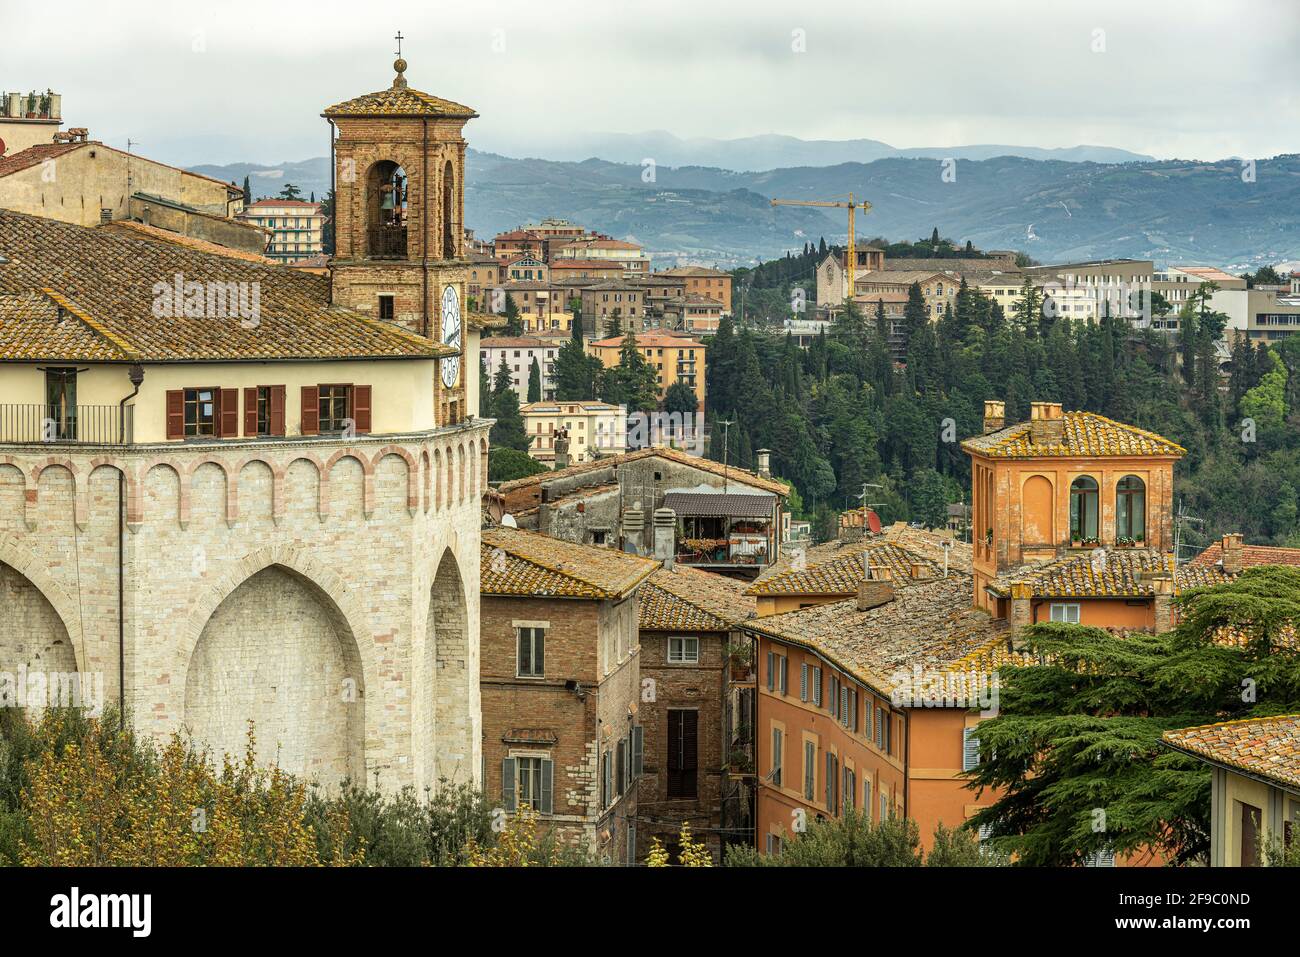 Urban landscape of Perugia, from the Rocca Paolina the view over part of the city and the bell tower of the church of San Ercolano. Perugia, Umbria Stock Photo